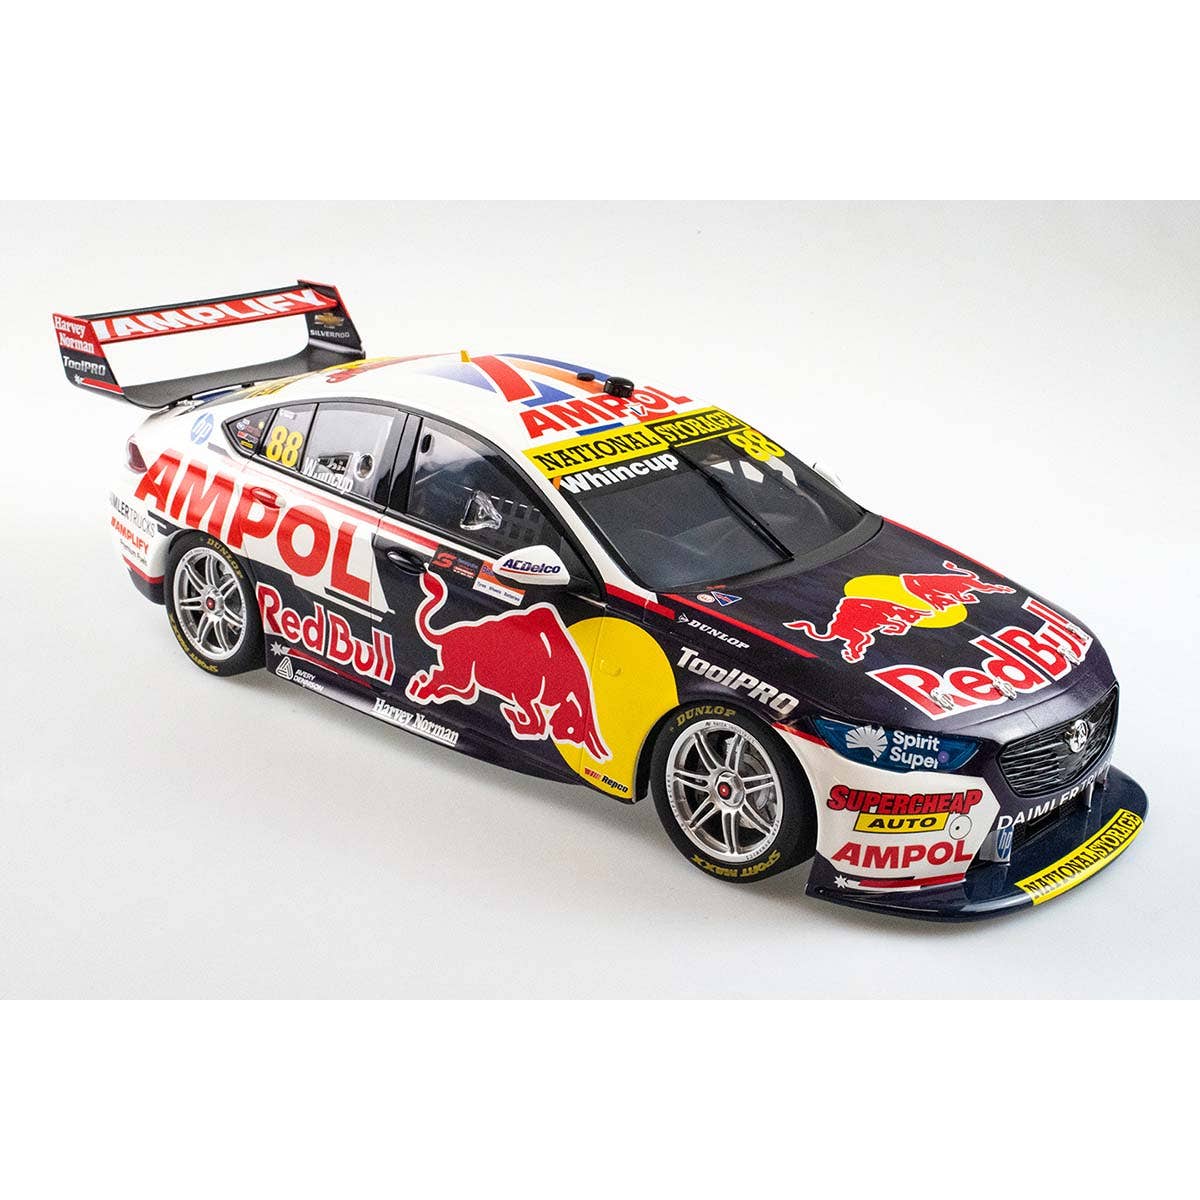 HOLDEN ZB COMMODORE - RED BULL AMPOL RACING #88 - JAMIE WHINCUP - BEAUREPAIRS SYDNEY SUPERNIGHT RACE 29 - LAST FULL-TIME SOLO DRIVE - 1:12 Scale Resin Model Car